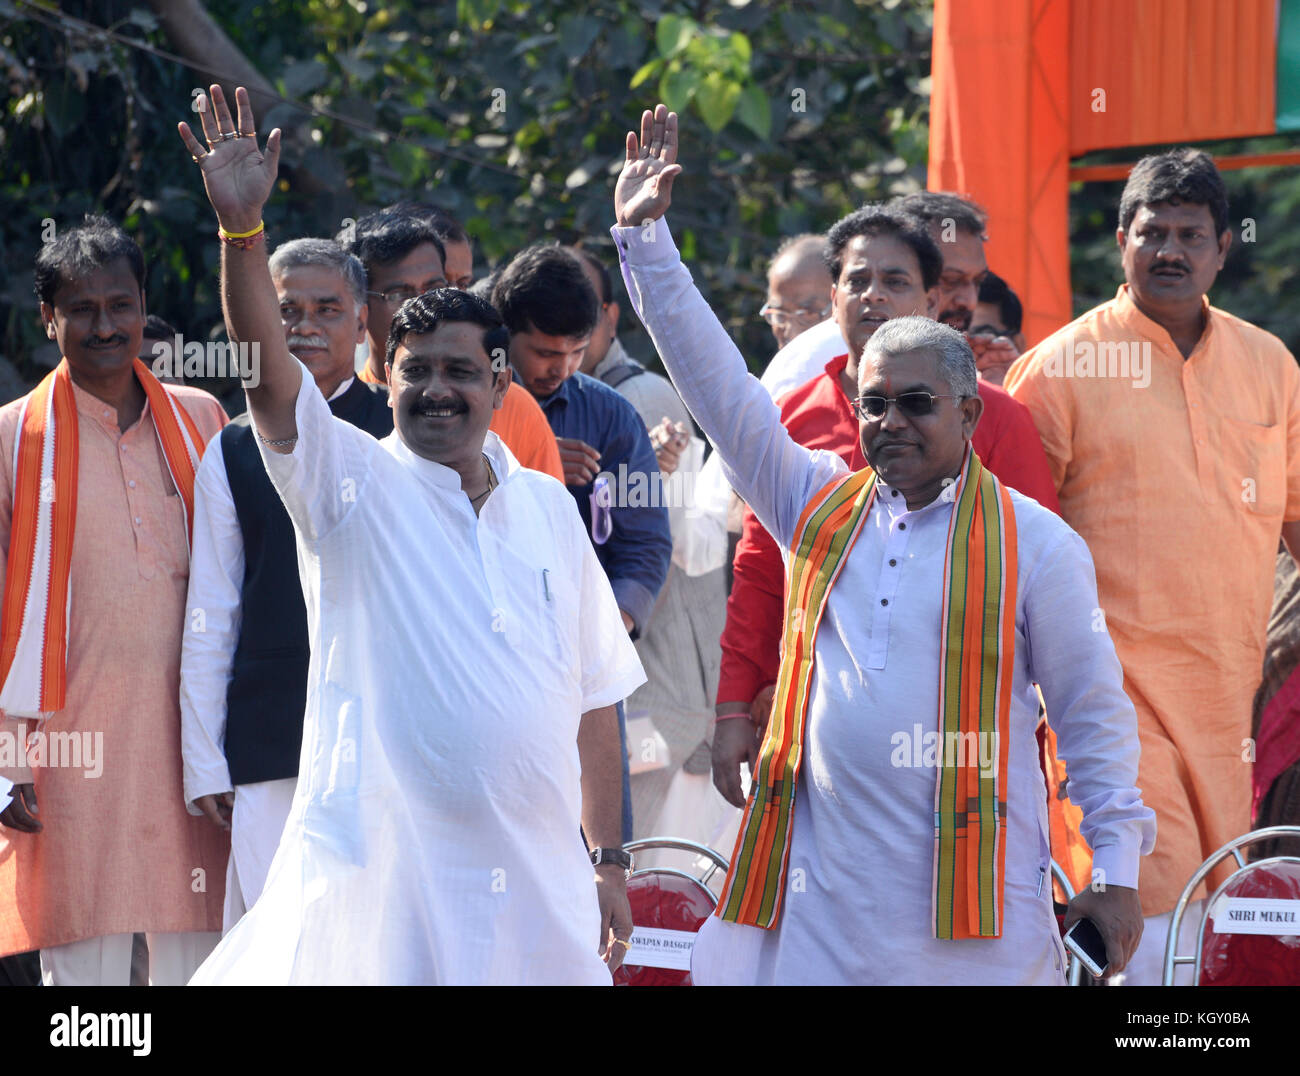 Rahul Sinha(left) and Dilip Ghosh(right) participates this BJP protests rally in Kolkata. Bharatiya Janta Party (BJP) holds a protest rally against appeasement politics of ruling Trinamool Congress and demanding restoration of democracy at state on November 10, 2017 in Kolkata. (Photo by Saikat Paul/Pacific Press) Stock Photo